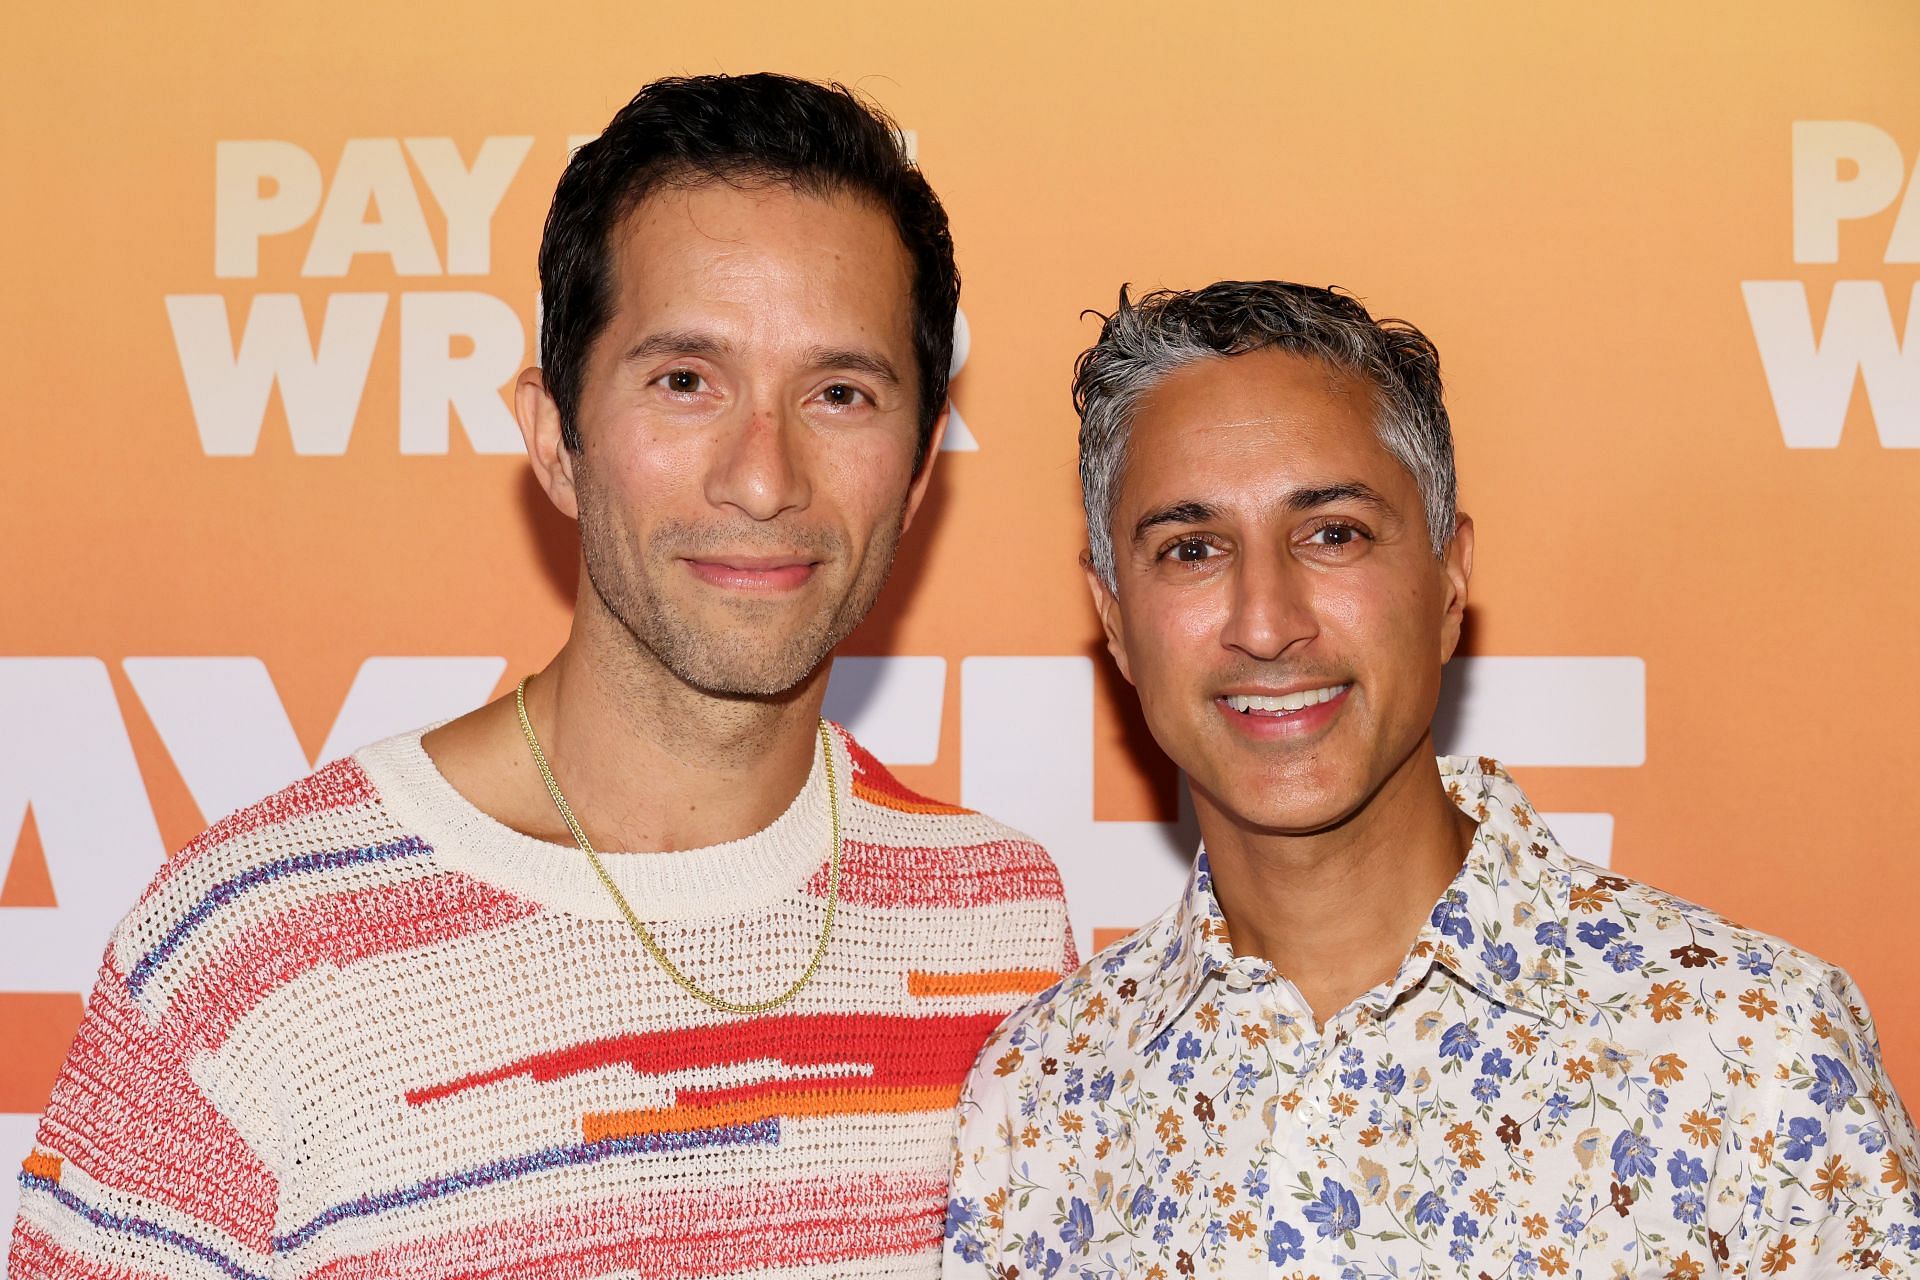 Maulik (right) at the &quot;Pay The Writer&quot; Opening Night. (Photo by Dia Dipasupil/Getty Images)